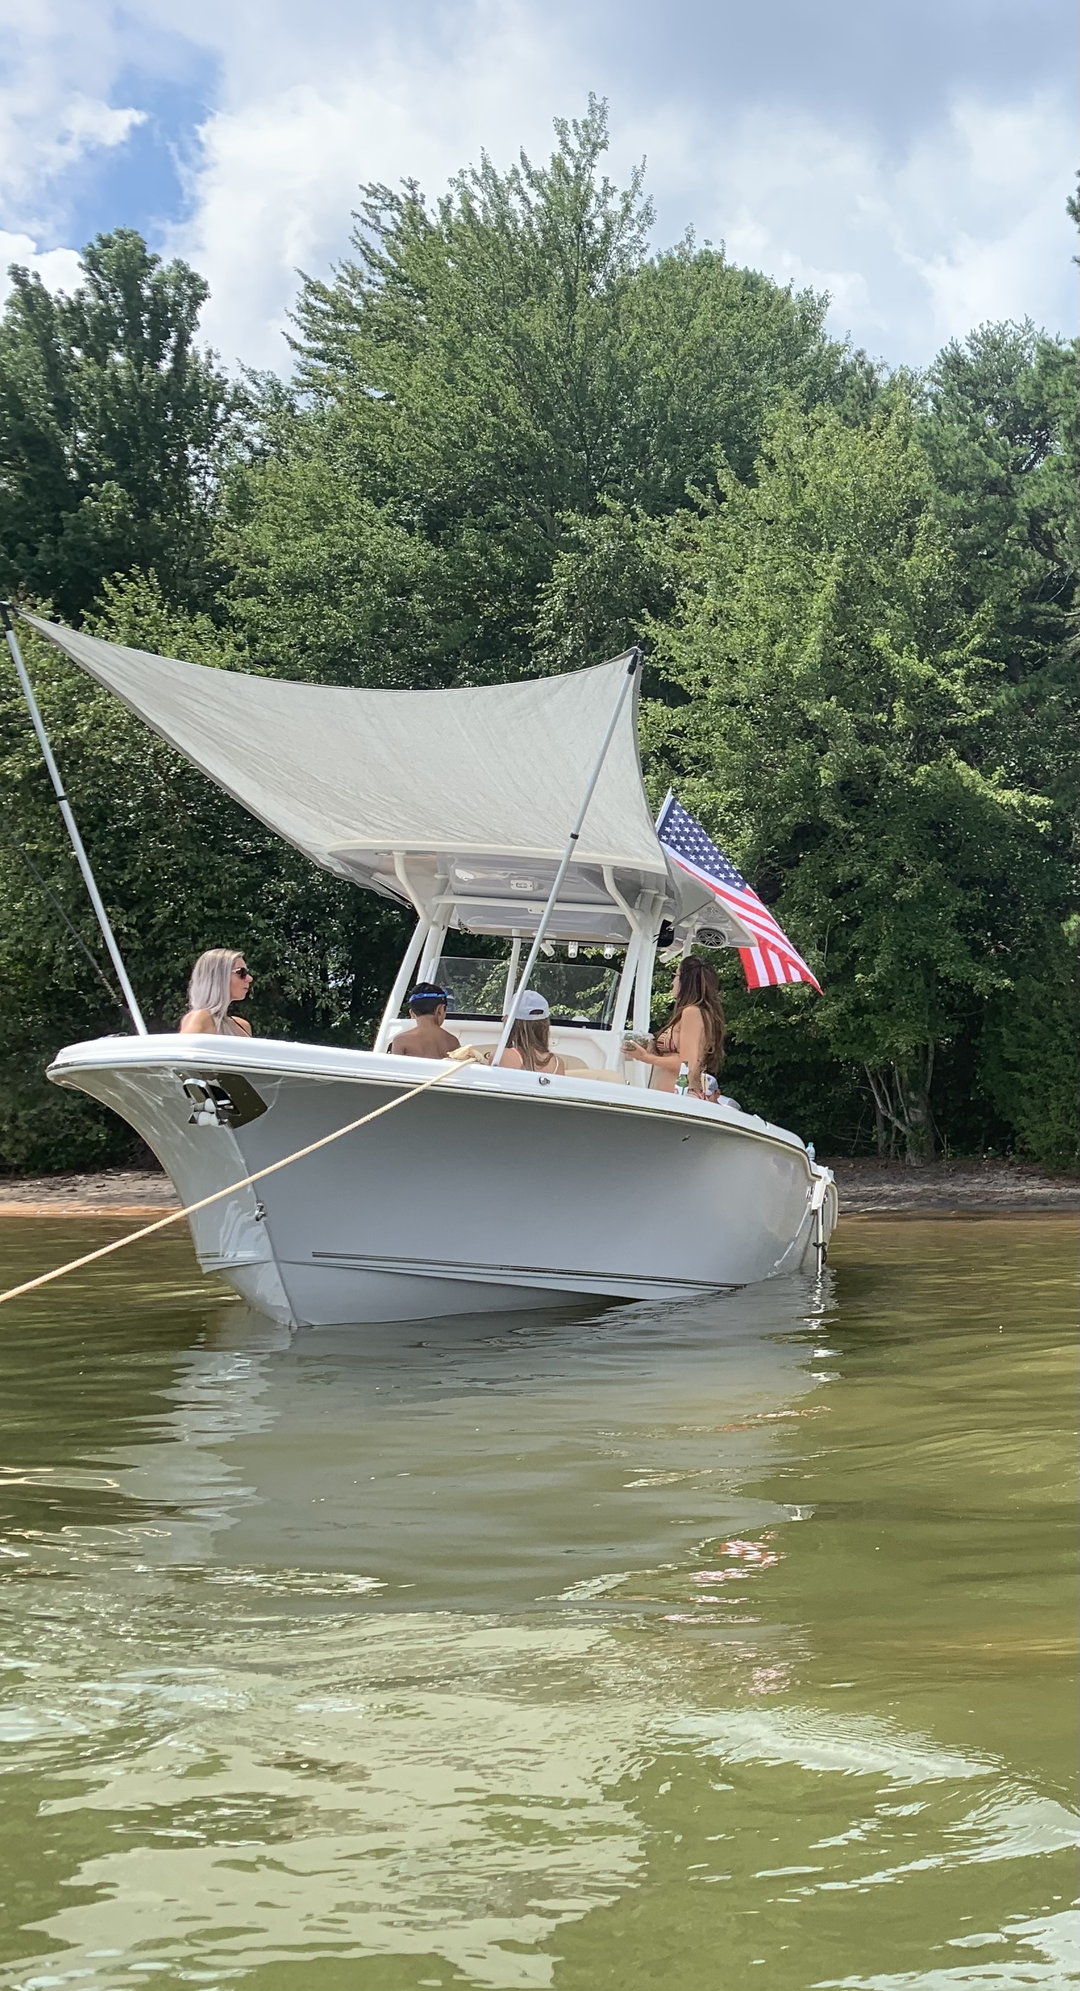 Trading bow shade for Umbrella - The Hull Truth - Boating and Fishing Forum